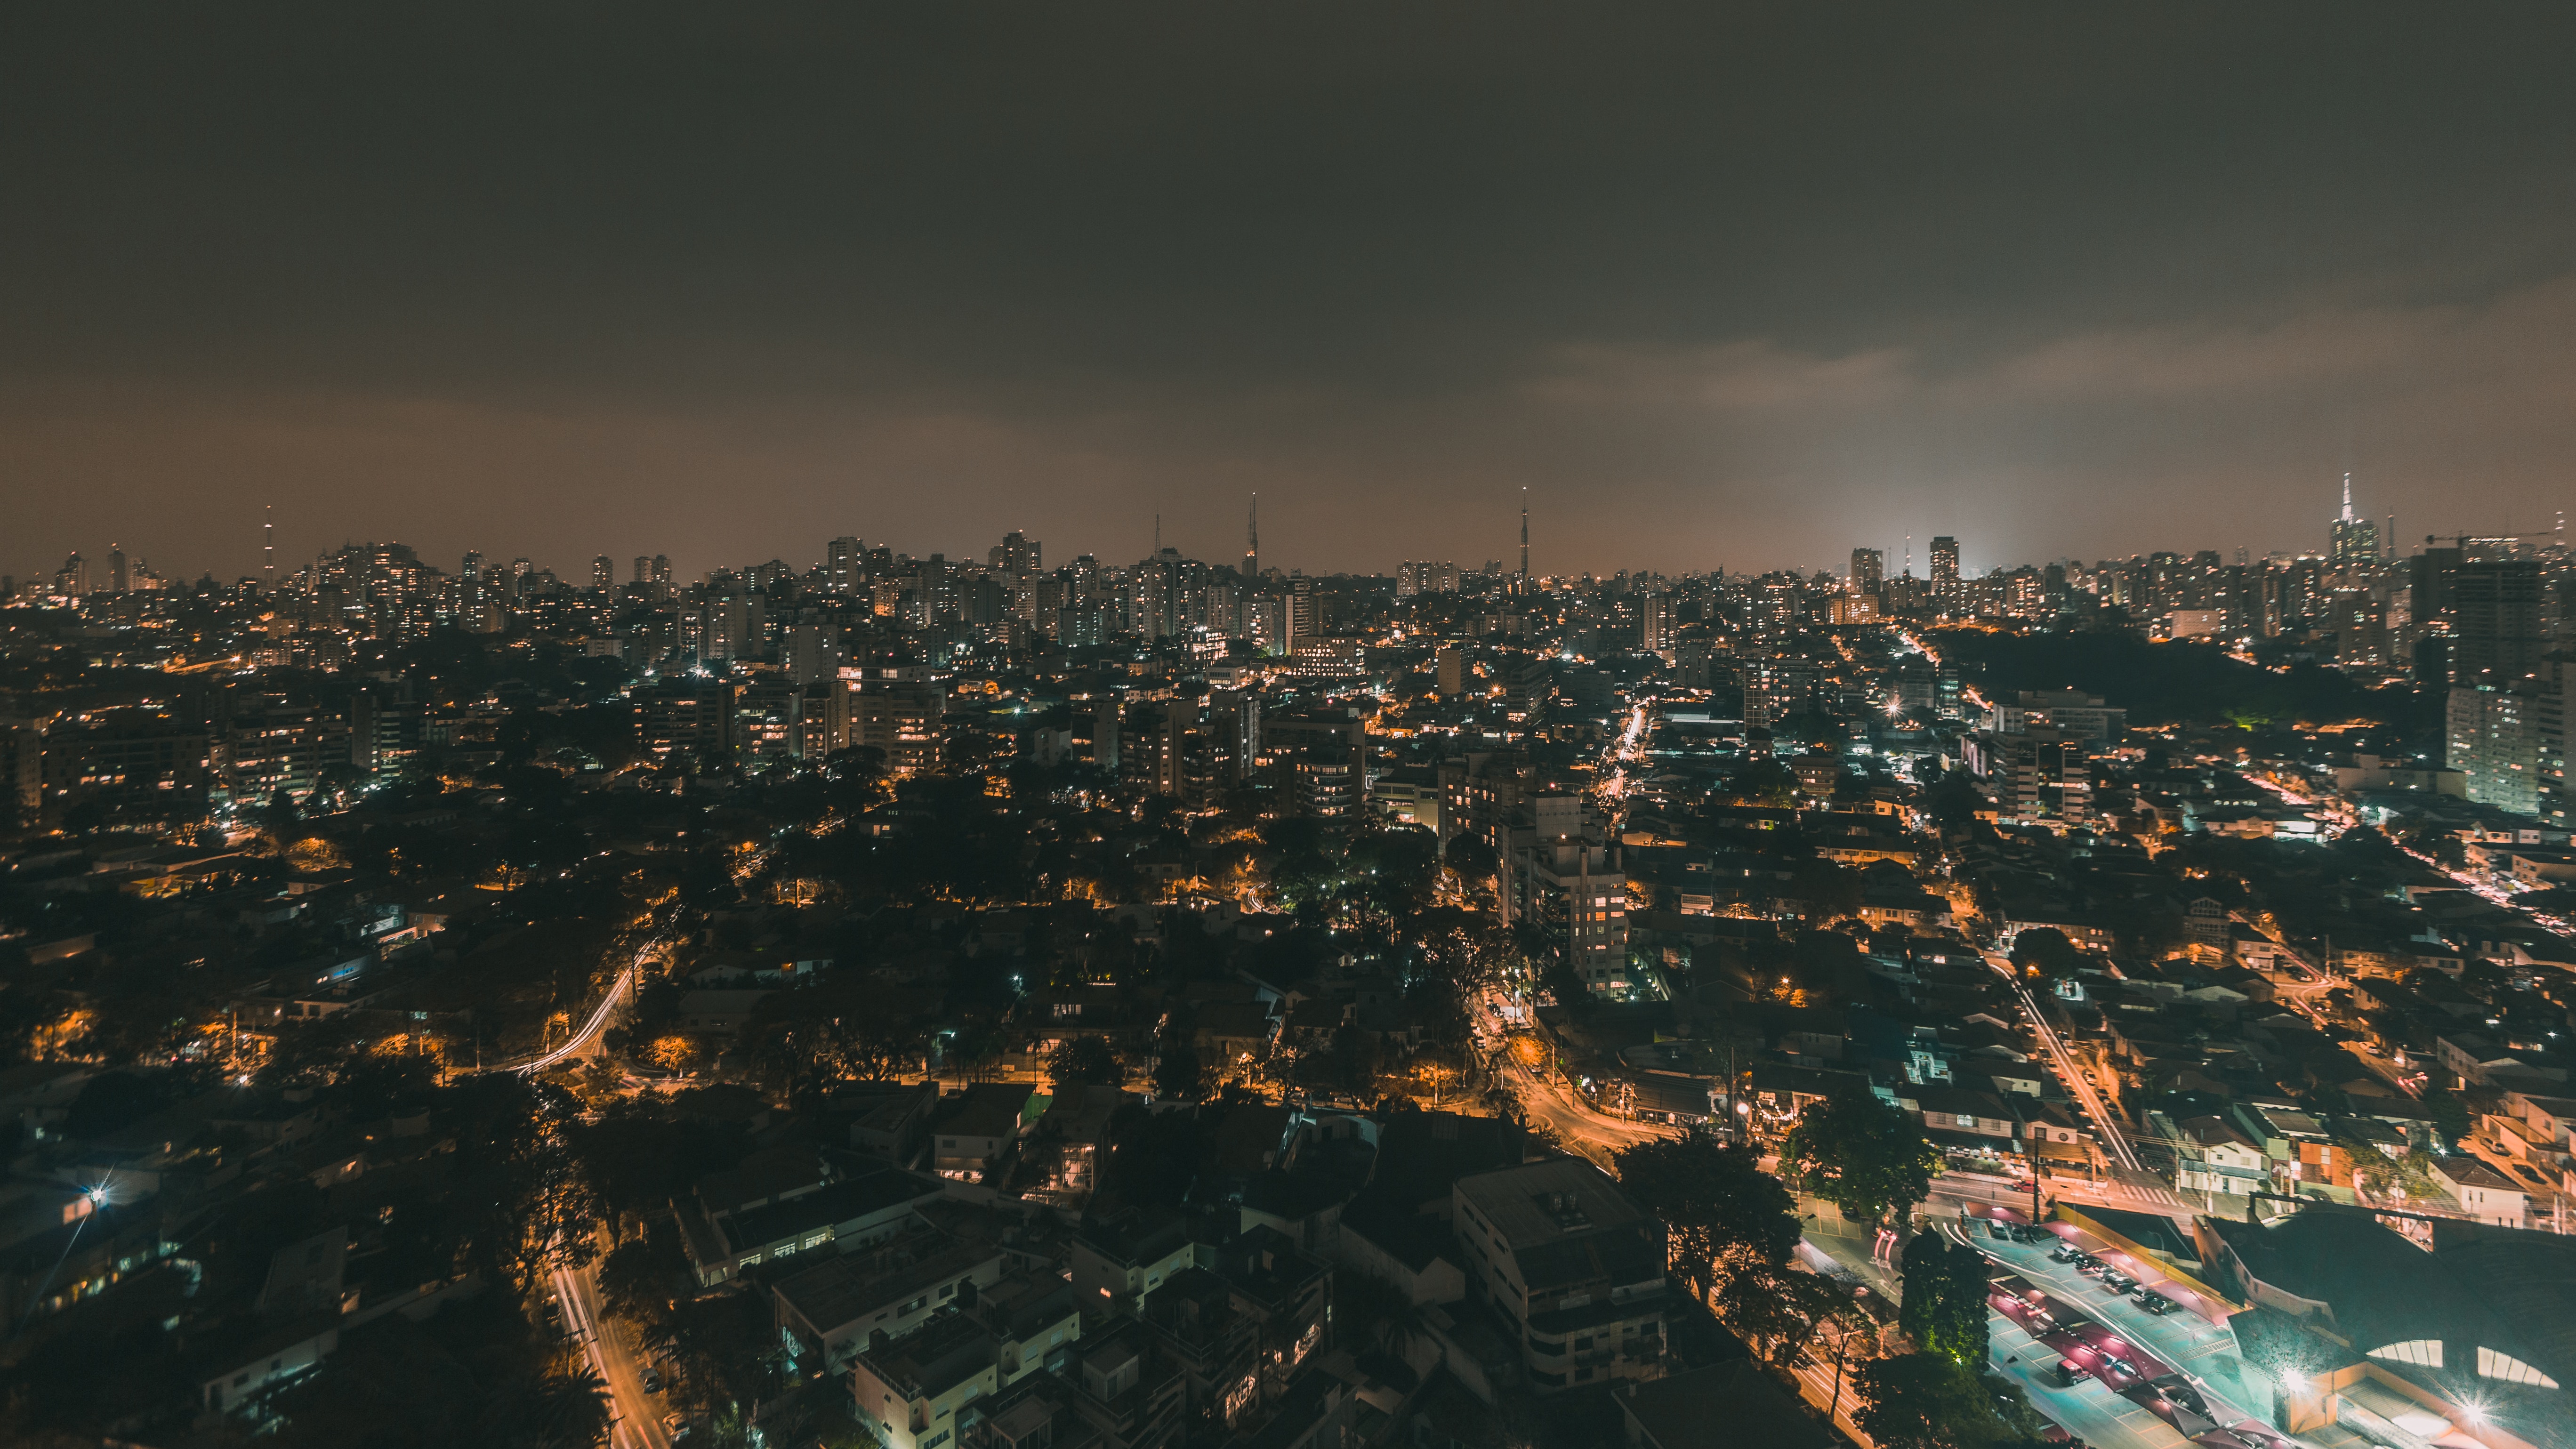 Cool Wallpapers night city, cities, building, view from above, horizon, city lights, panorama